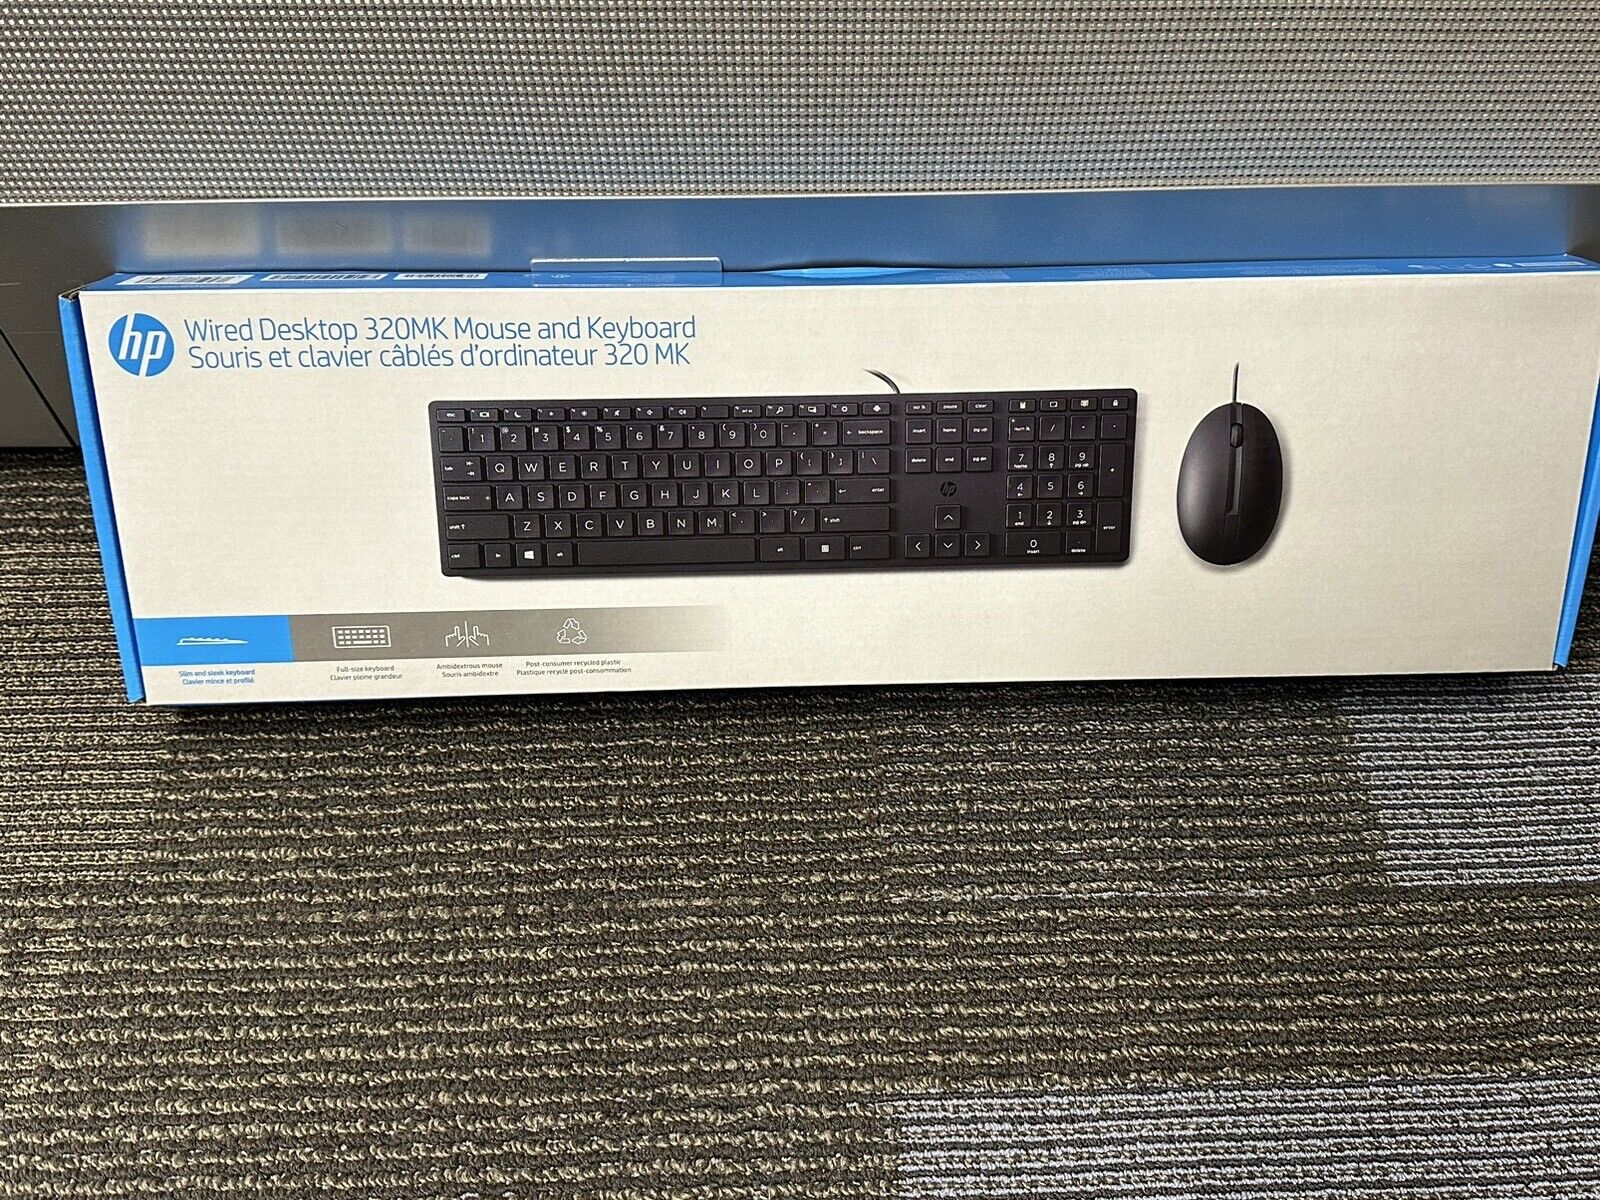 HP Wired Desktop 320MK Mouse and Keyboard - Black